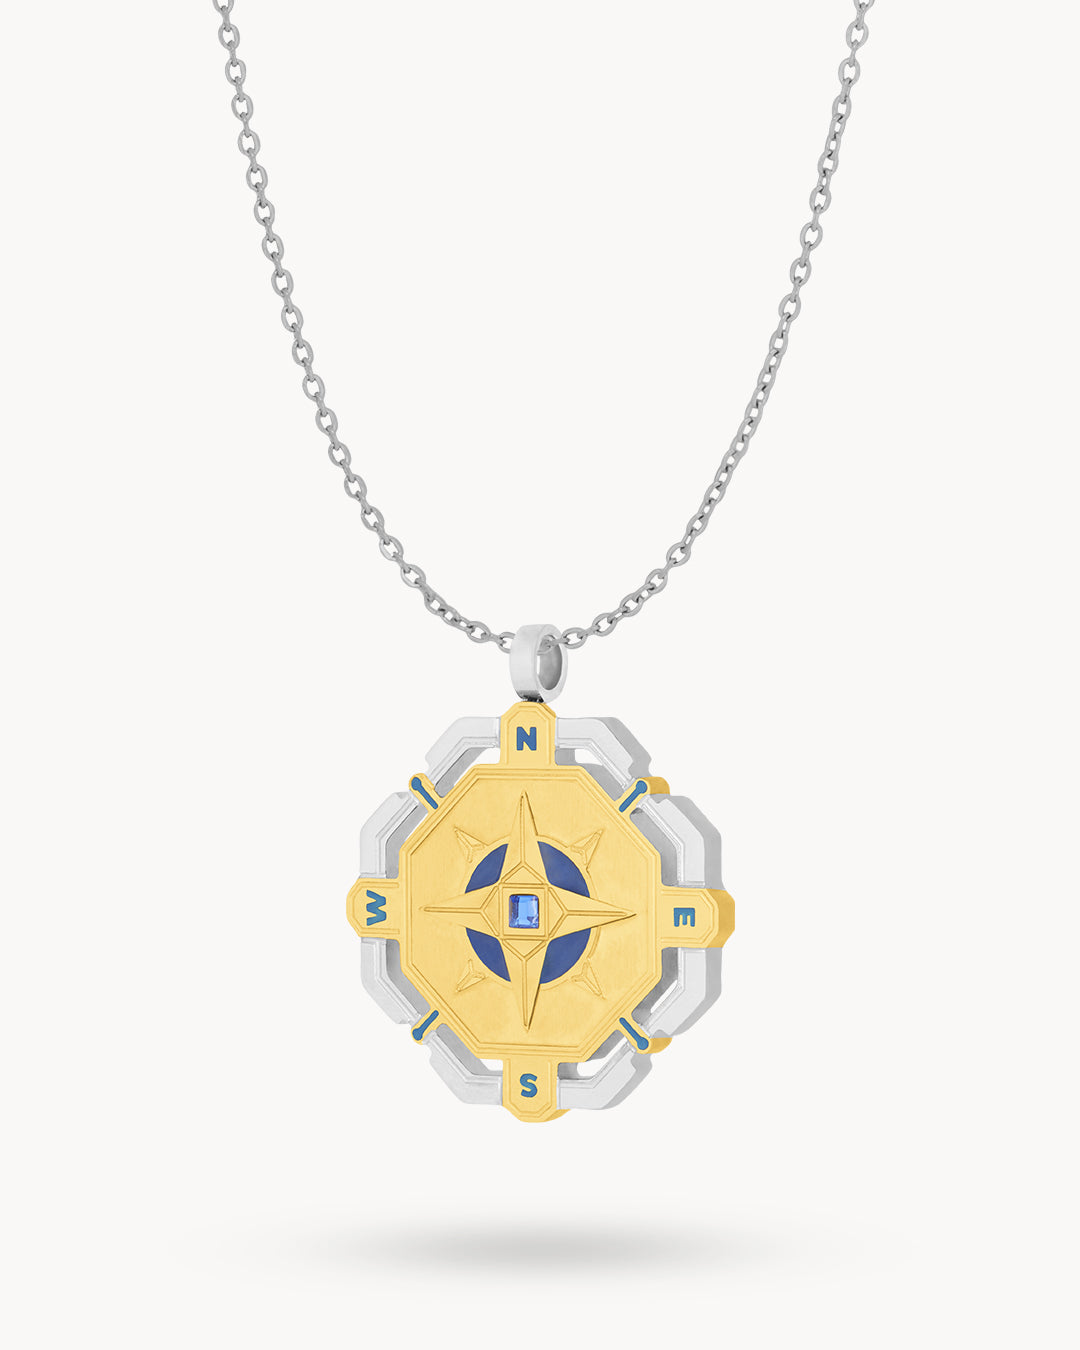 Octagon Compass Necklace